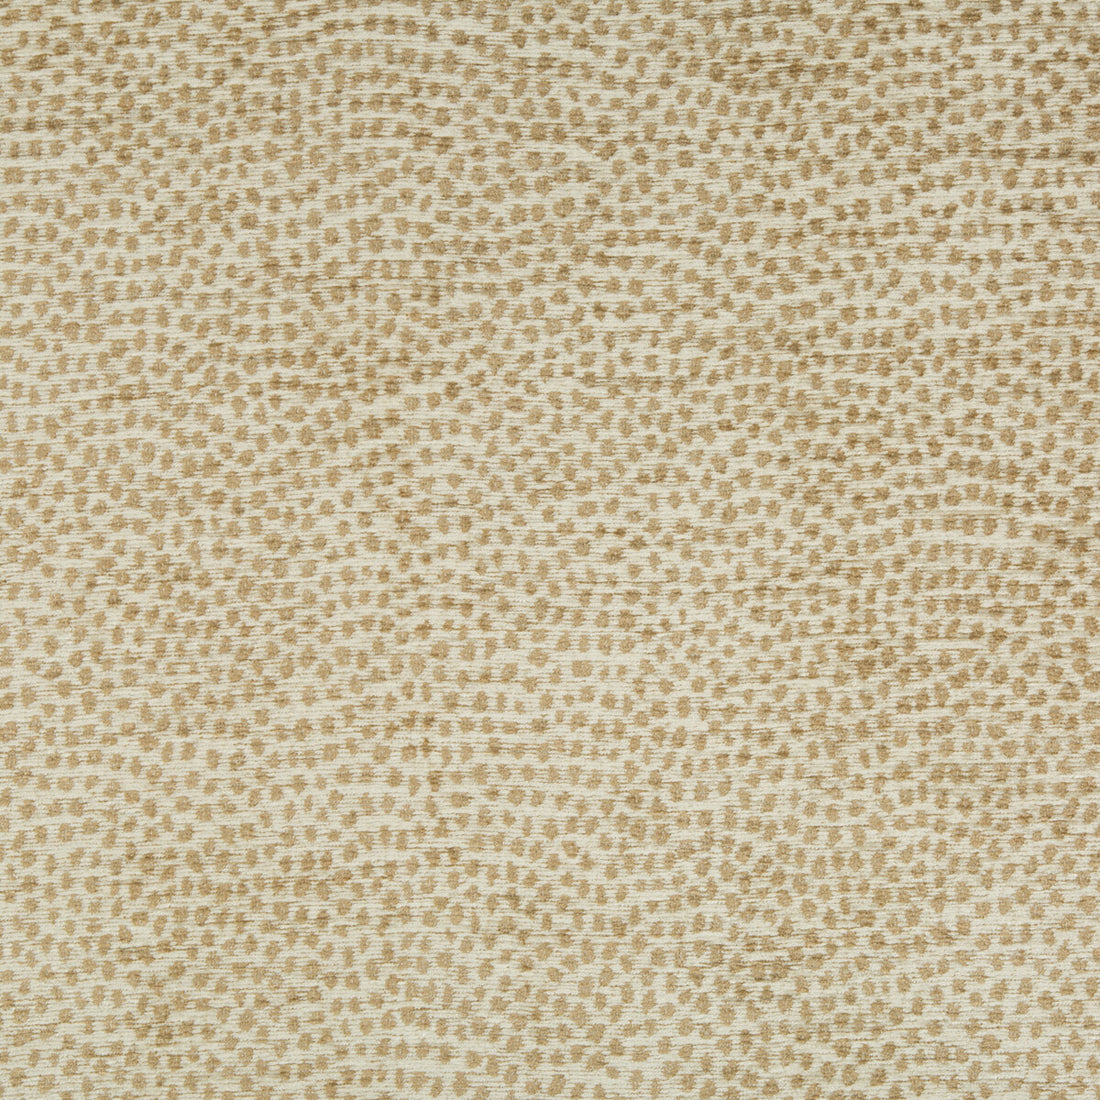 Kravet Design fabric in 34971-4 color - pattern 34971.4.0 - by Kravet Design in the Performance Crypton Home collection